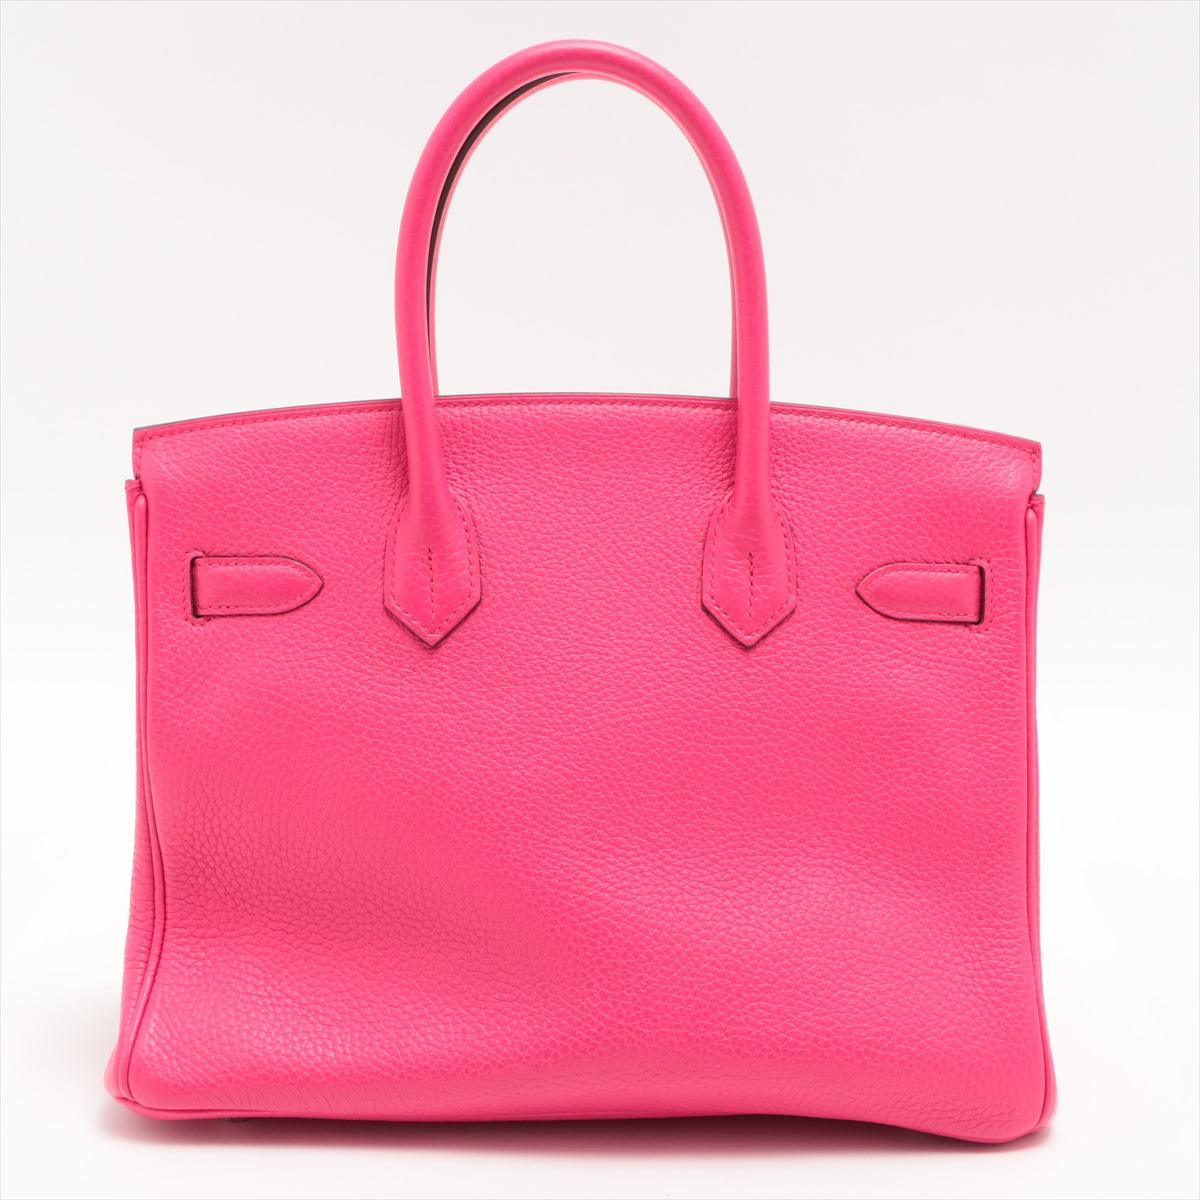 Hermes Birkin 30 Taurillon Clemence Rose In Good Condition For Sale In Indianapolis, IN